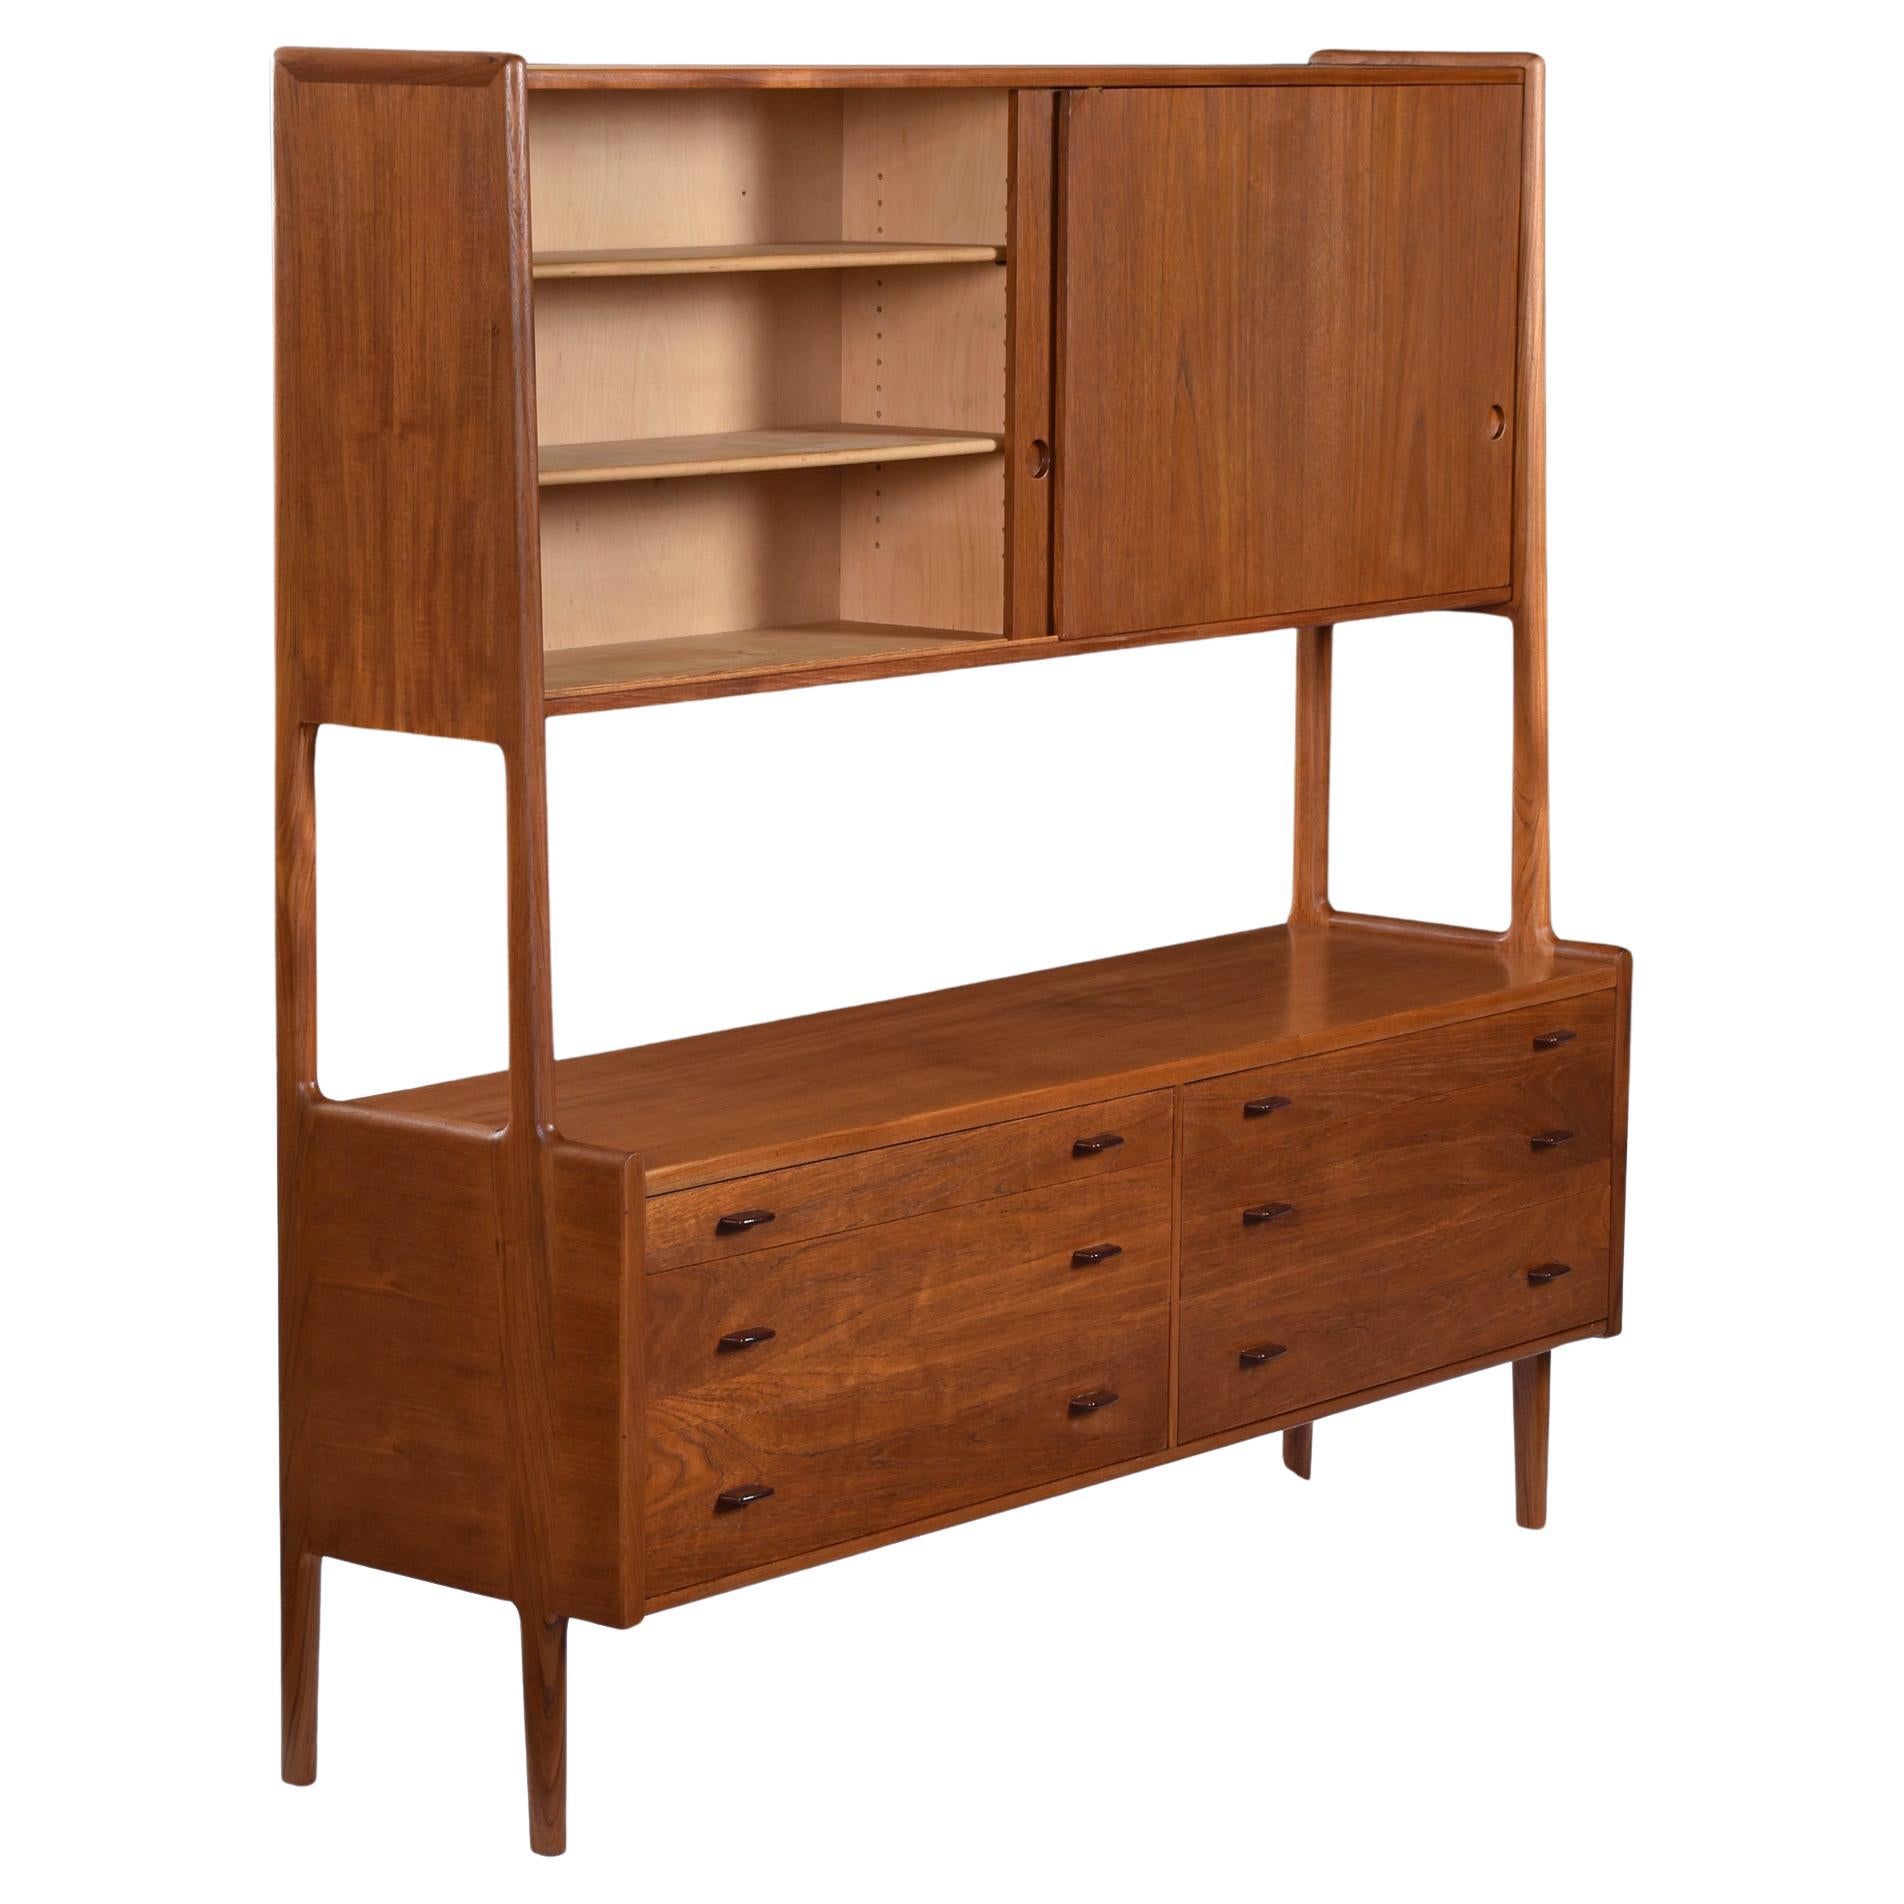 Born on April 22nd in 1958, this free-standing wall-unit / hutch is truly an architectural masterpiece.  The entire construction can be easily broken down and assembled without any hardware.  The top and bottom cabinets lock and slide into the